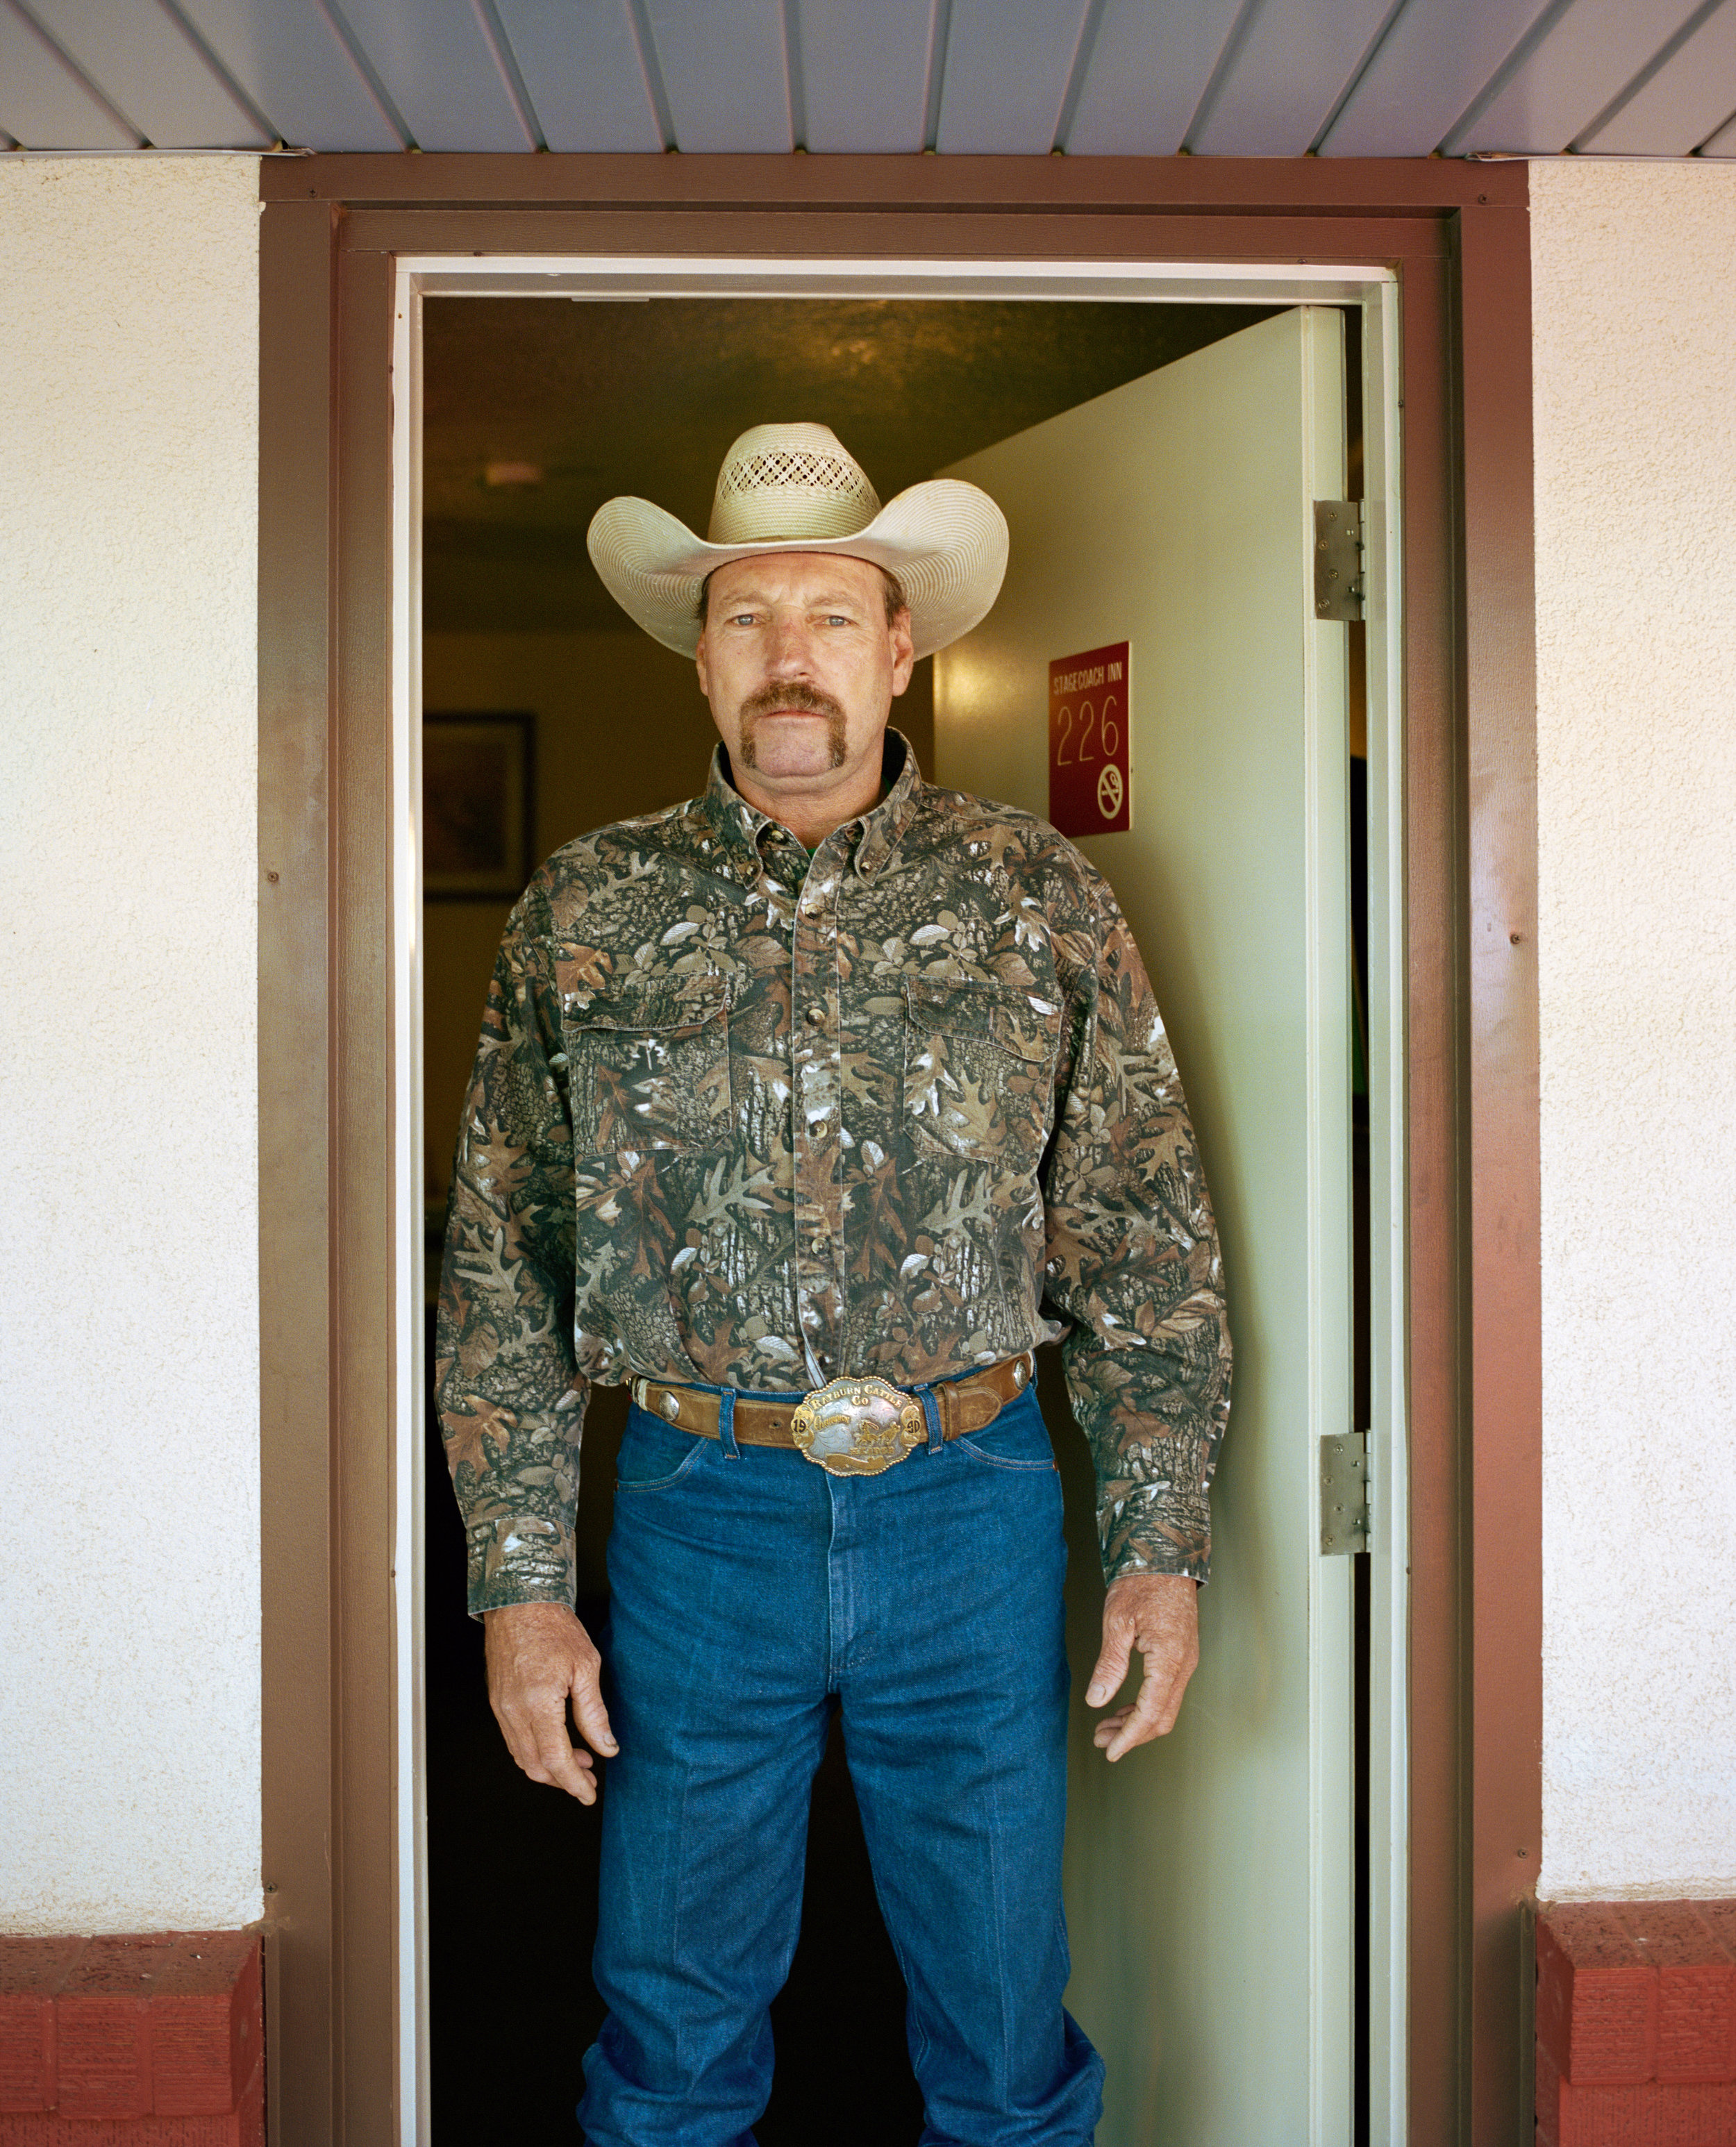 Jay T Harbour, Stagecoach motel, Carlsbad NM